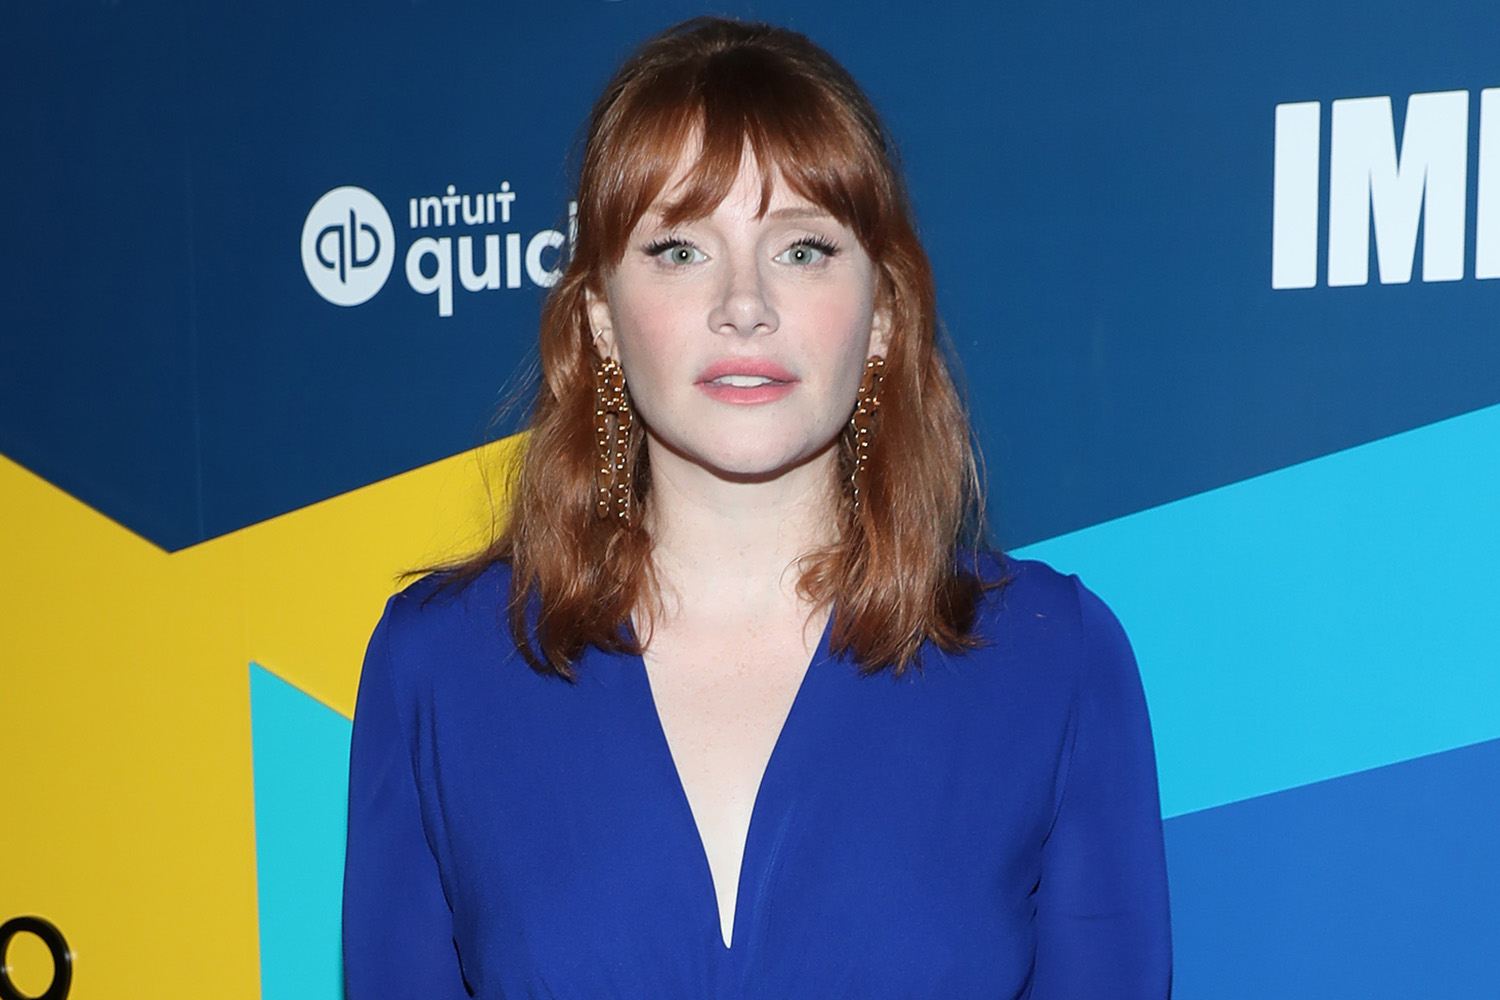 Bryce Dallas Howard attends The IMDb Studio Presented By Intuit QuickBooks at Toronto 2019